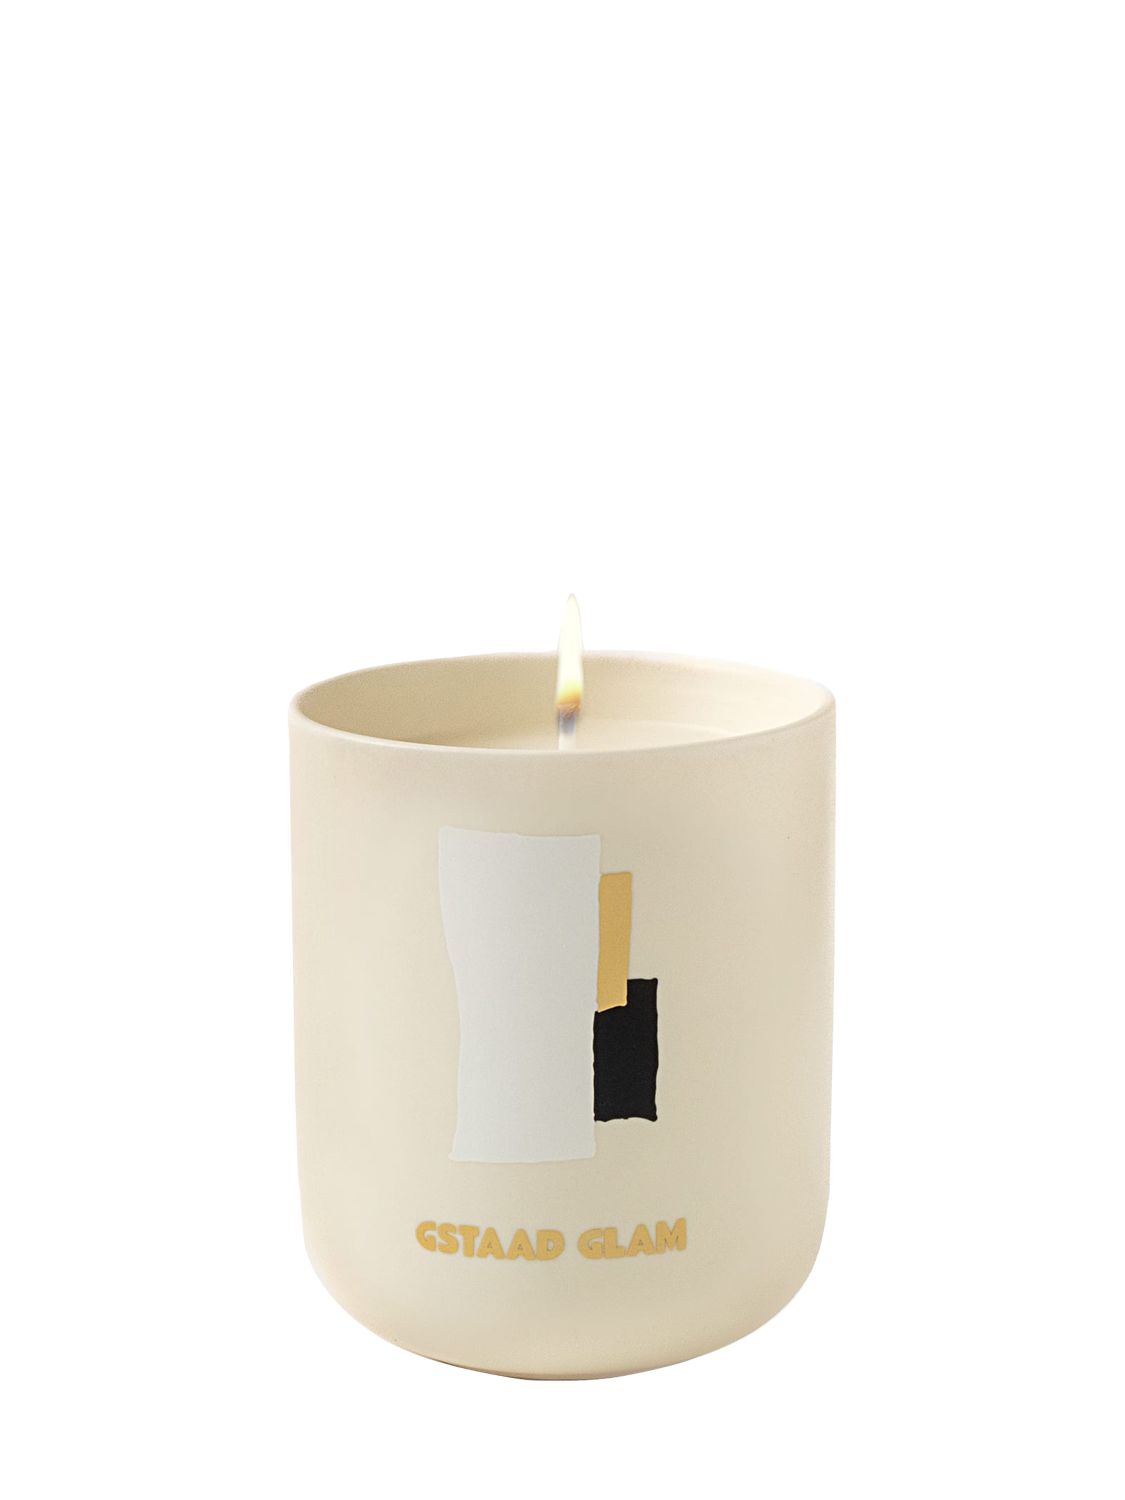 Image of Gstaad Glam Scented Candle